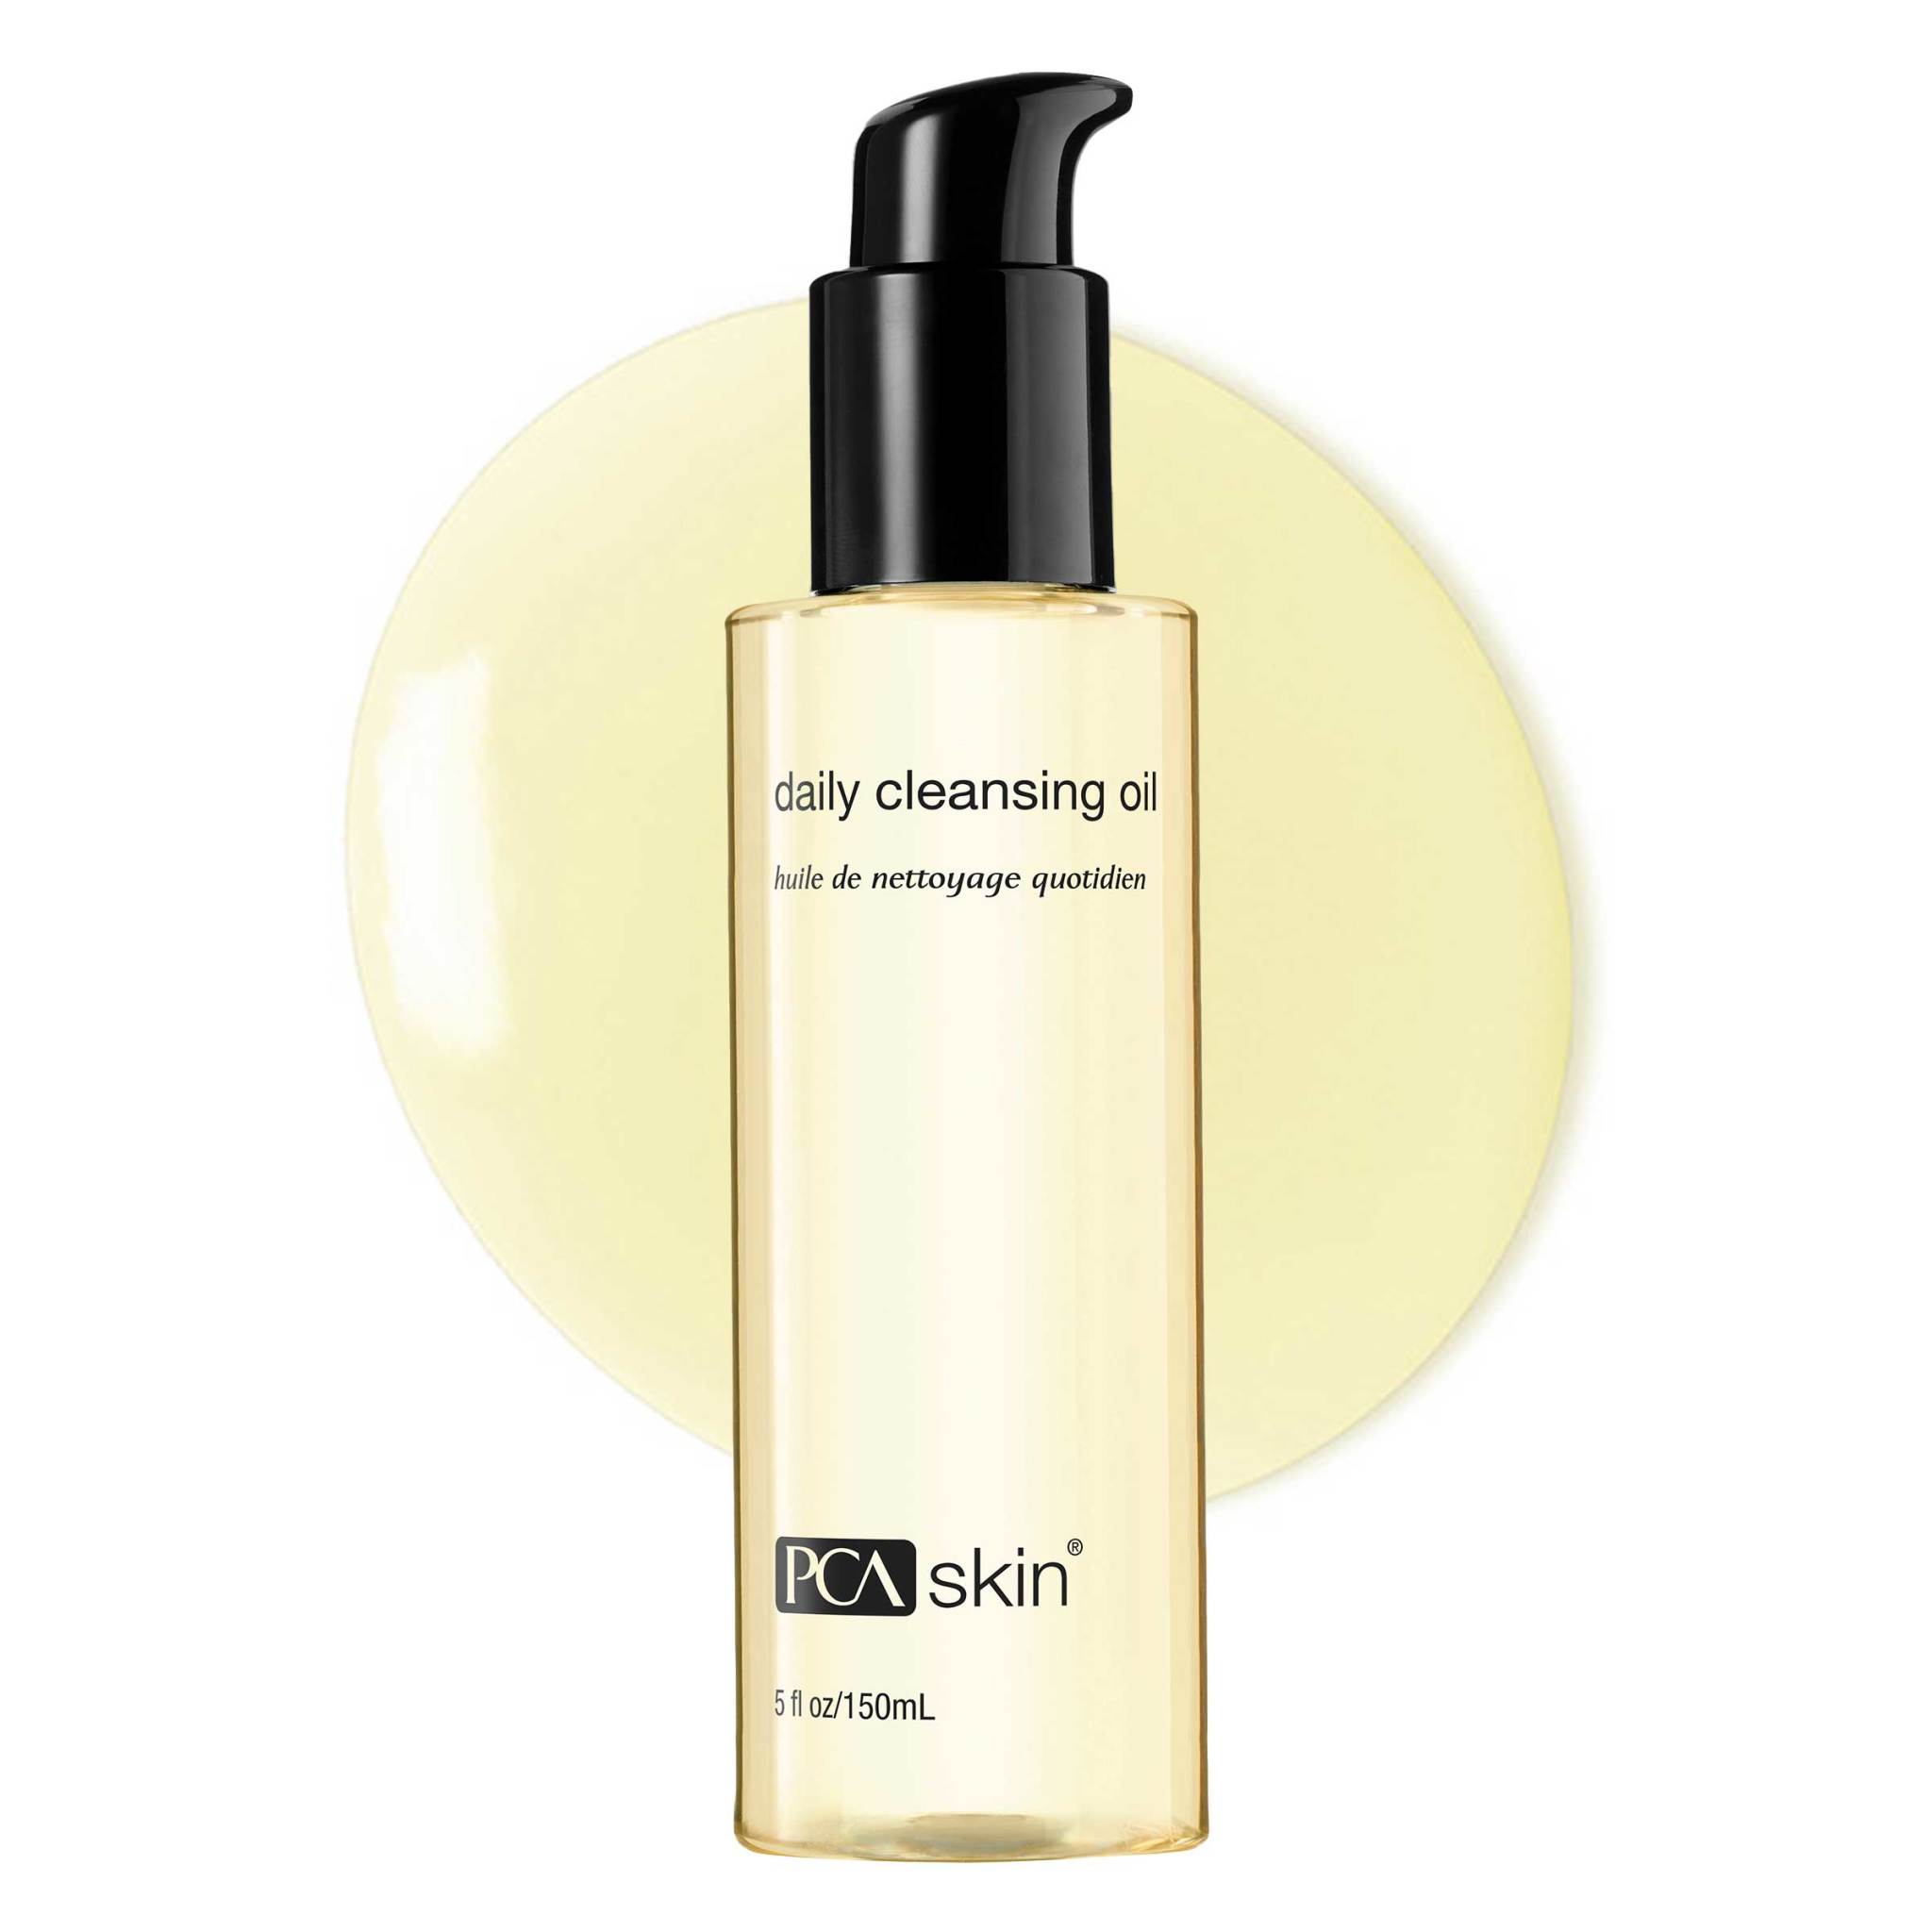 Daily Cleansing Oil main image.